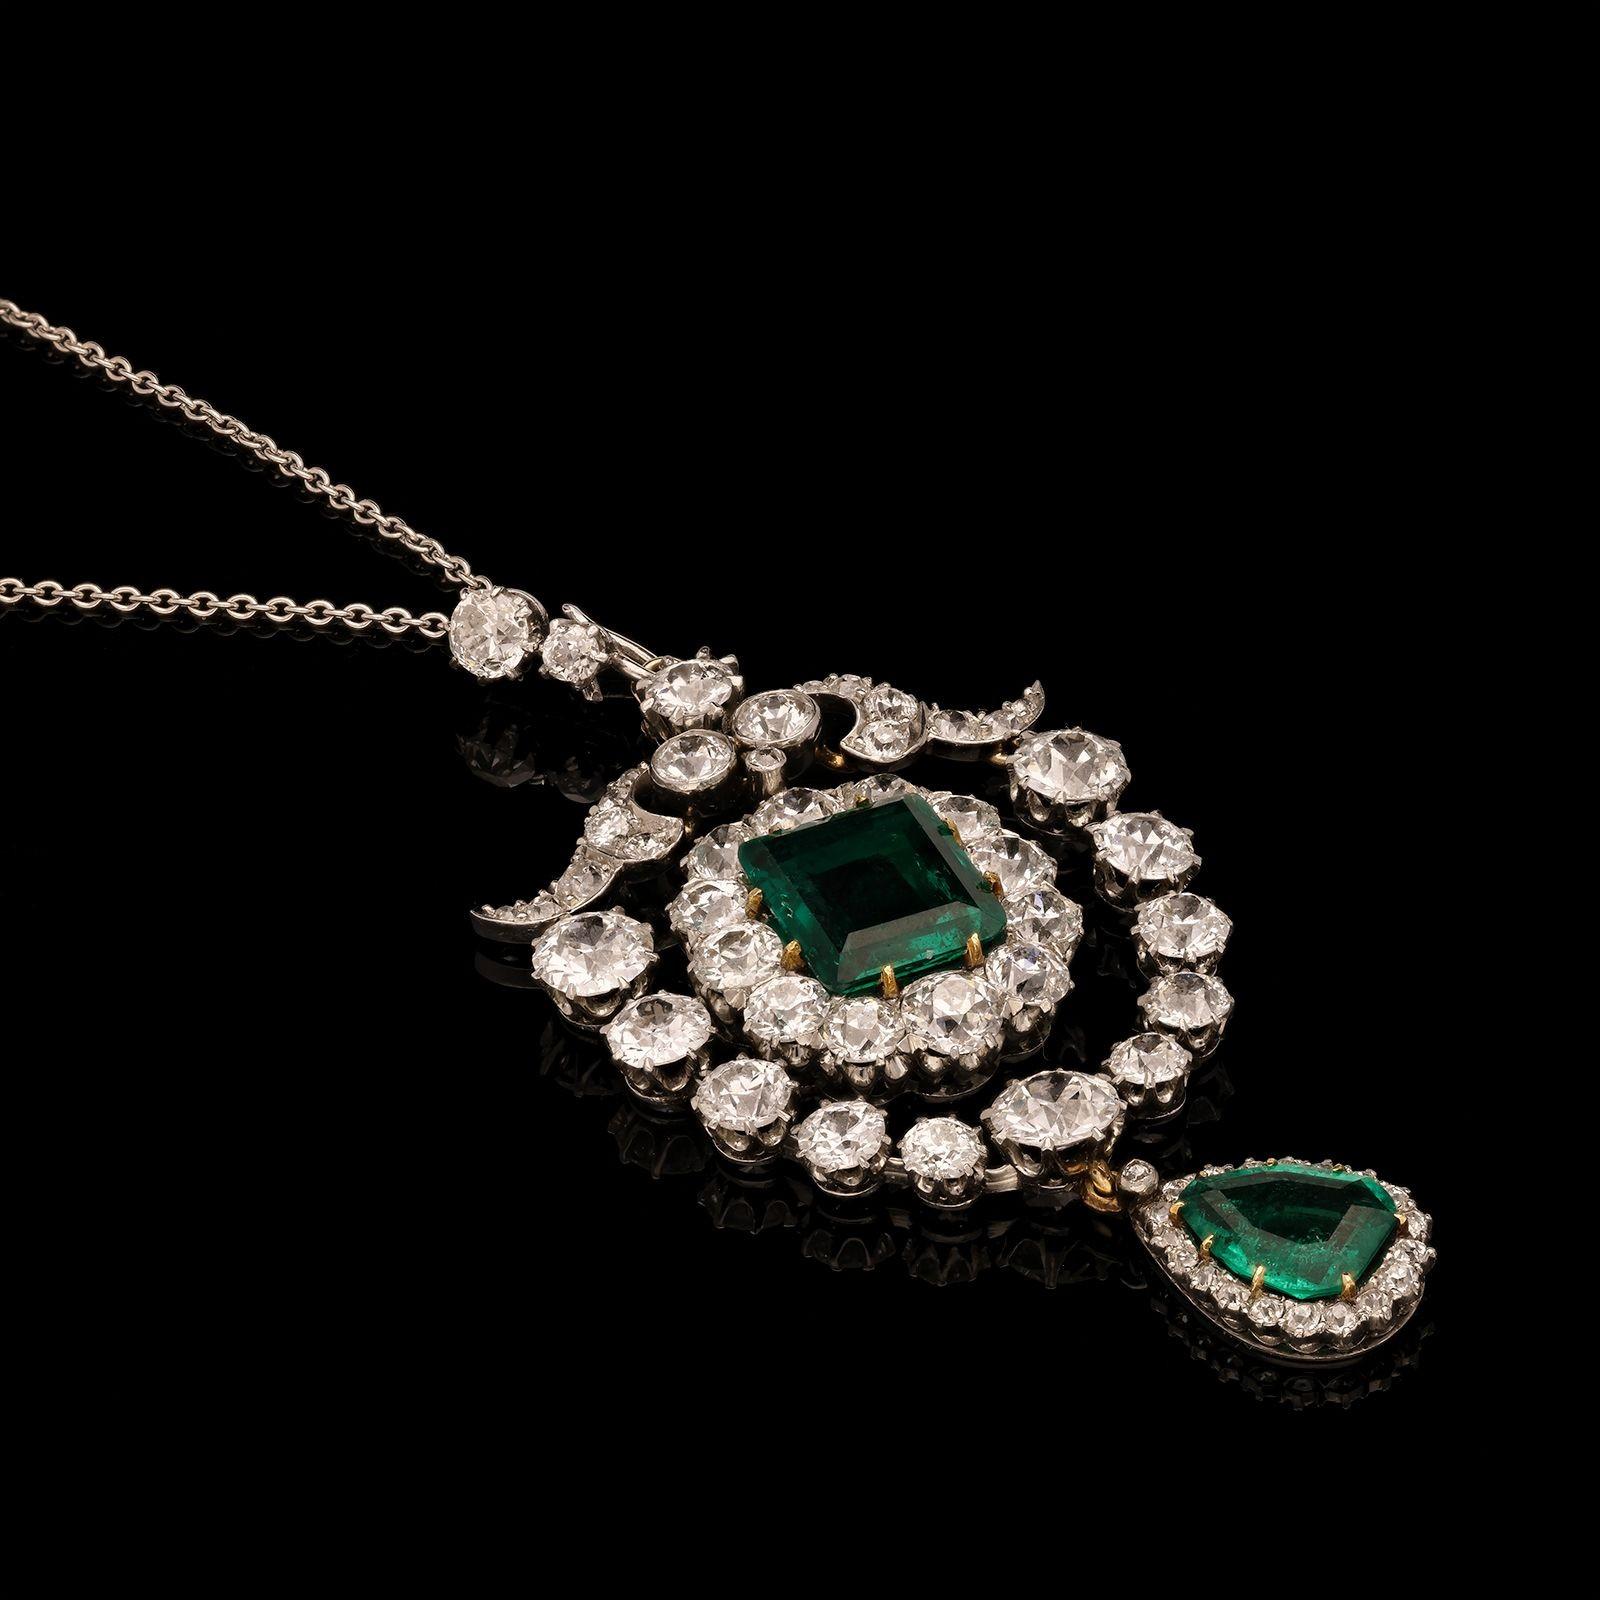 A stunning Edwardian diamond and emerald pendant c.1910, the pendant centred on a rectangular Colombian emerald weighing 2.10cts with a cluster surround of old-cut diamonds, suspended within an outer frame of graduated old-cut diamonds with a scroll